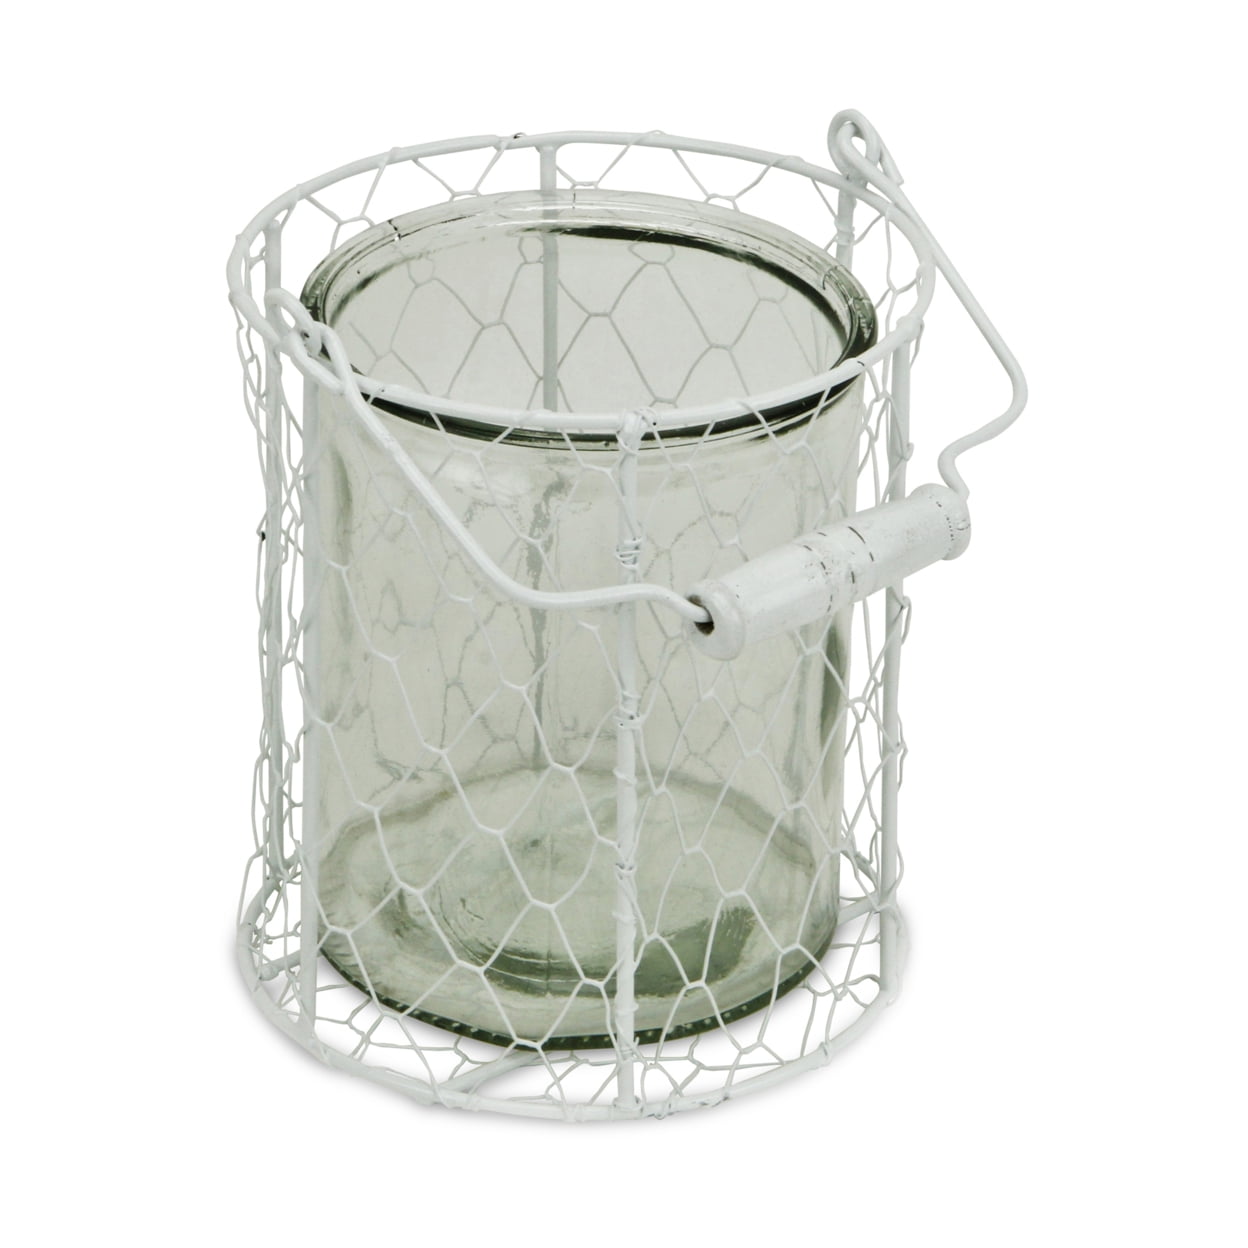 Picture of CheungsRattan 15S001WXL Round Glass Jar in Wire Basket, White - Extra Large